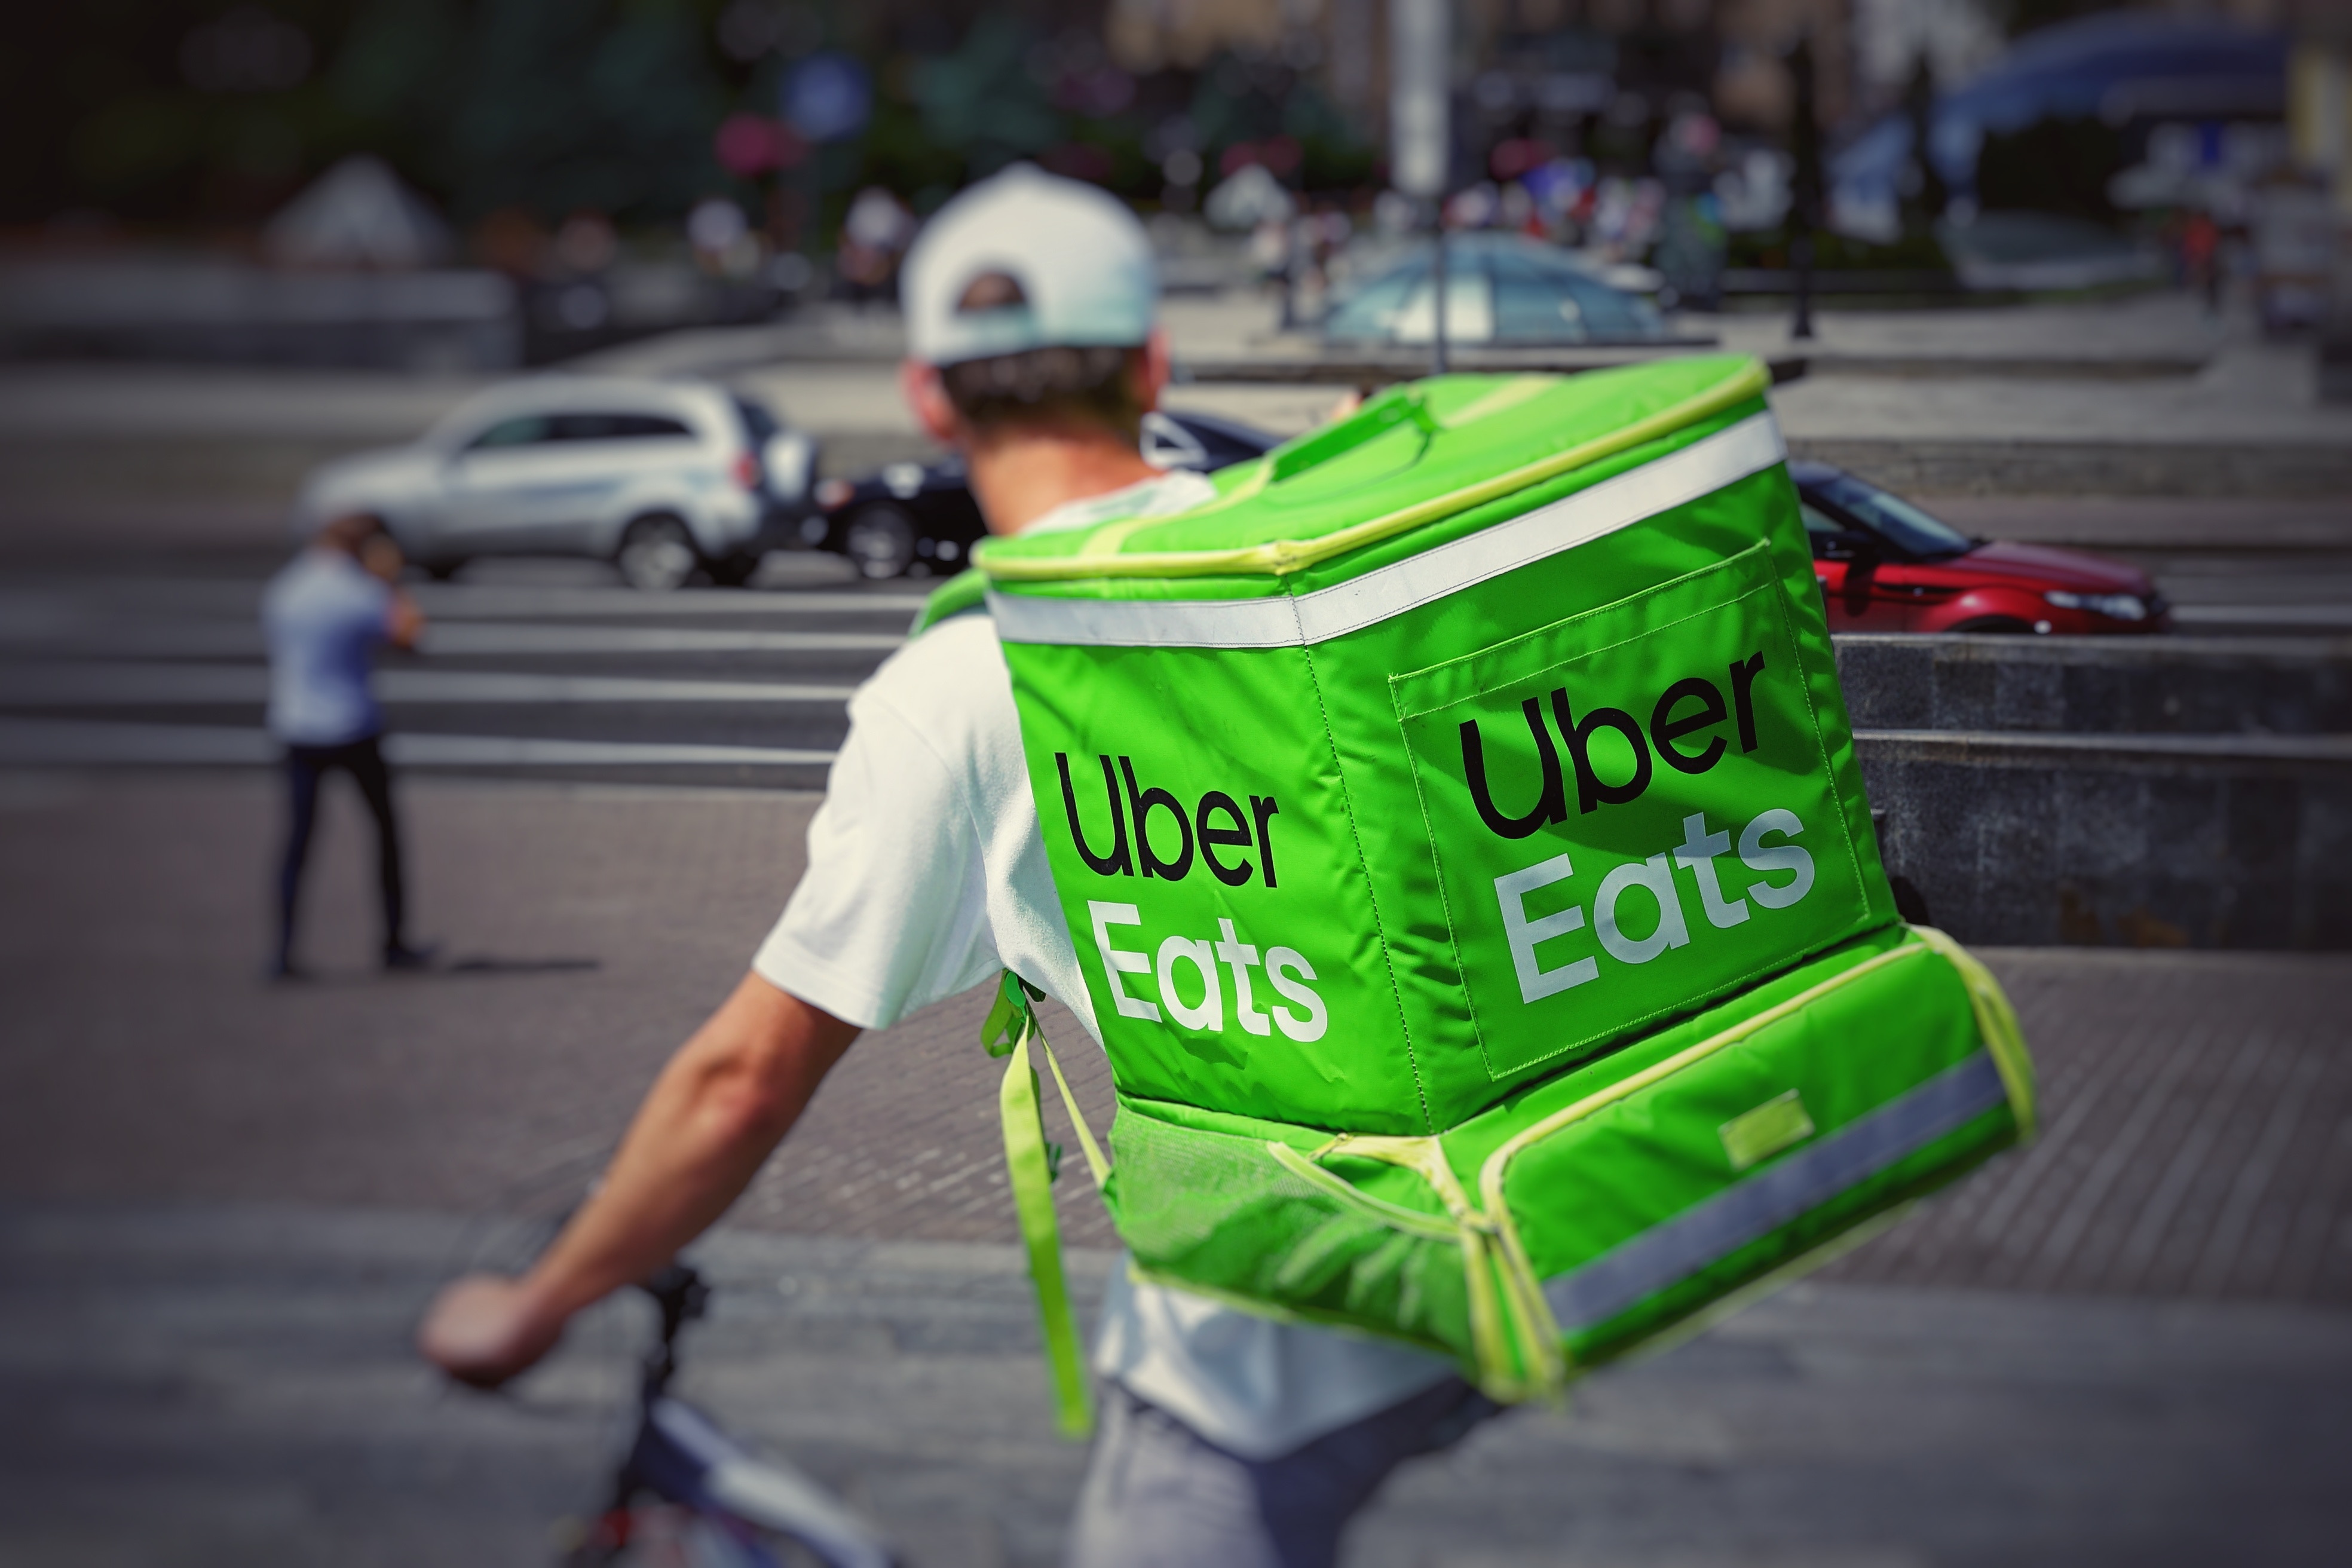 Man on a bike with an Uber Eats backpack.